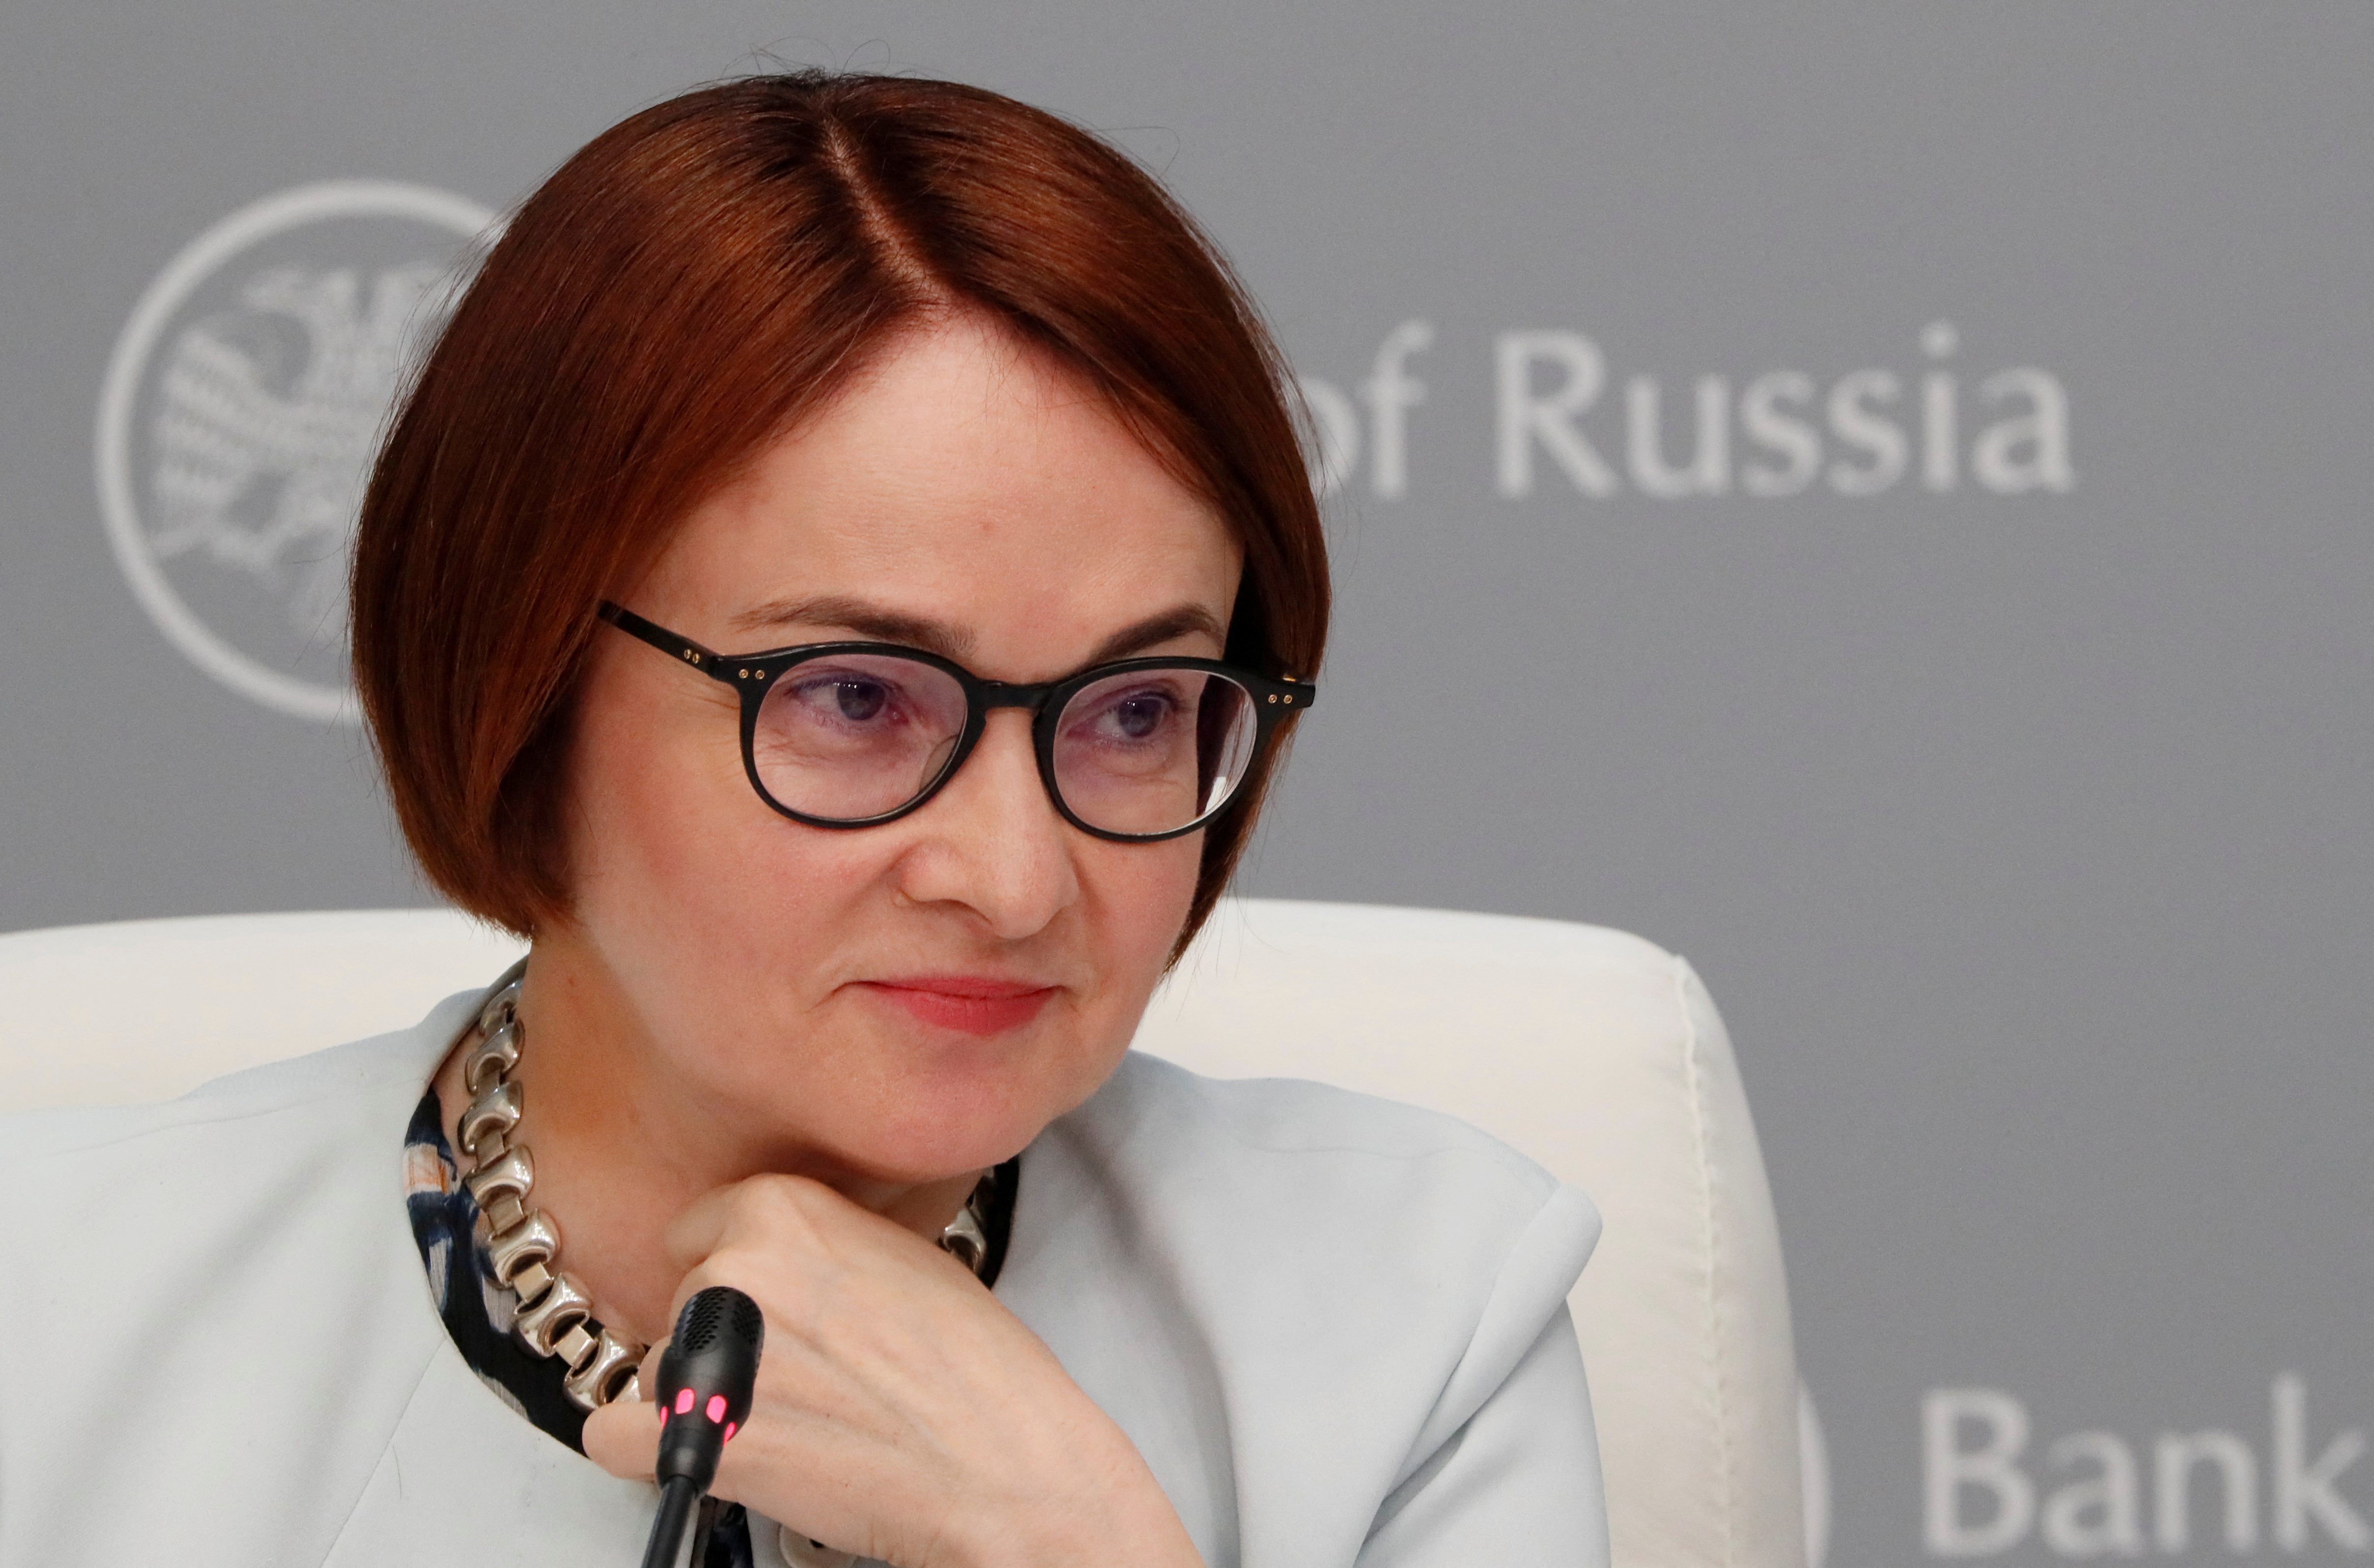 Russian Central Bank Governor Elvira Nabiullina attends a news conference in Moscow